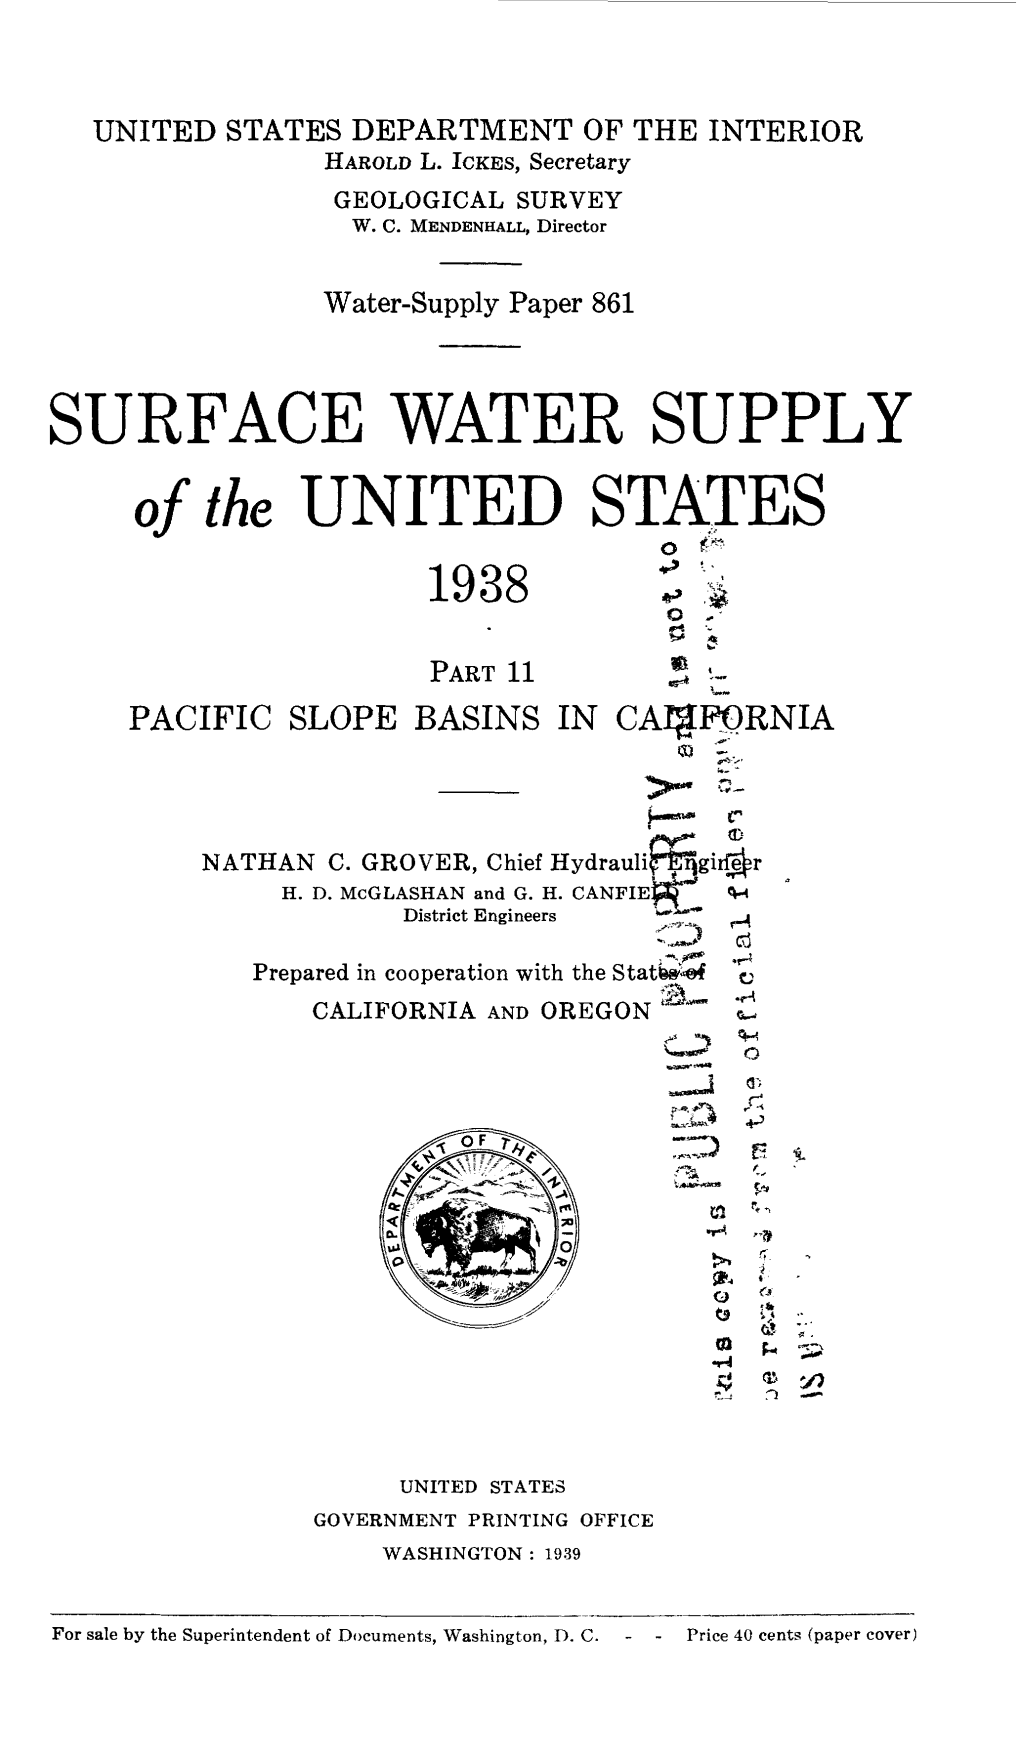 SURFACE WATER SUPPLY of the UNITED S WES 1938 J I Od - PART 11 * PACIFIC SLOPE BASINS in CAI§Fprnia